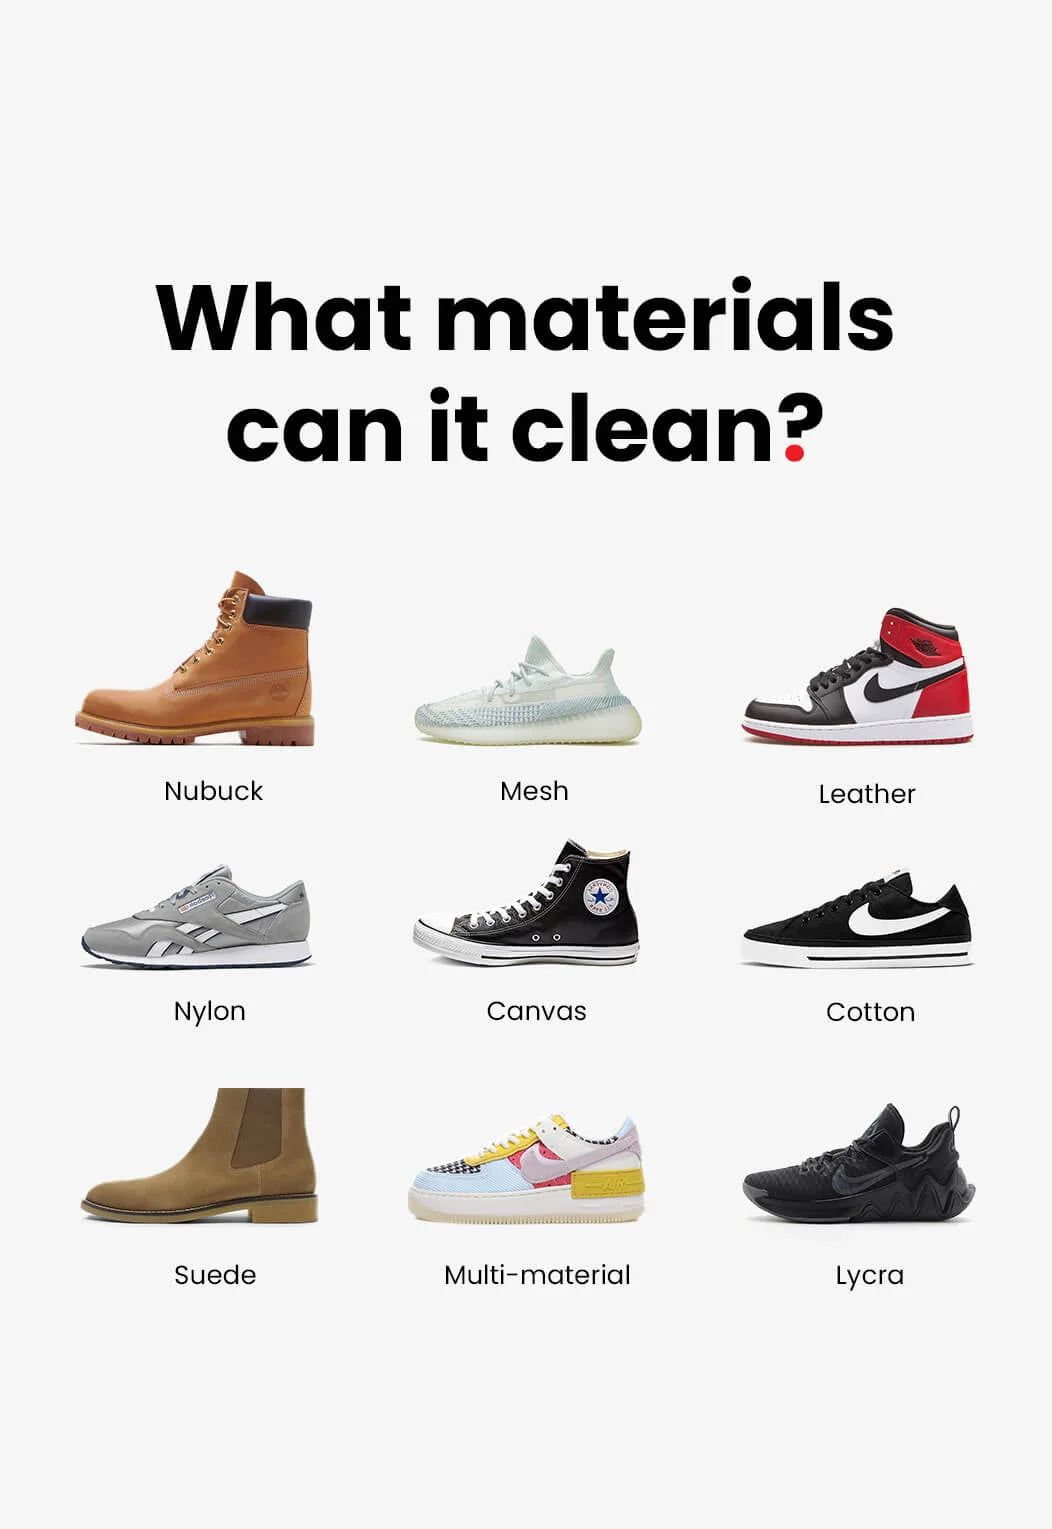 what shoe materials can clean?